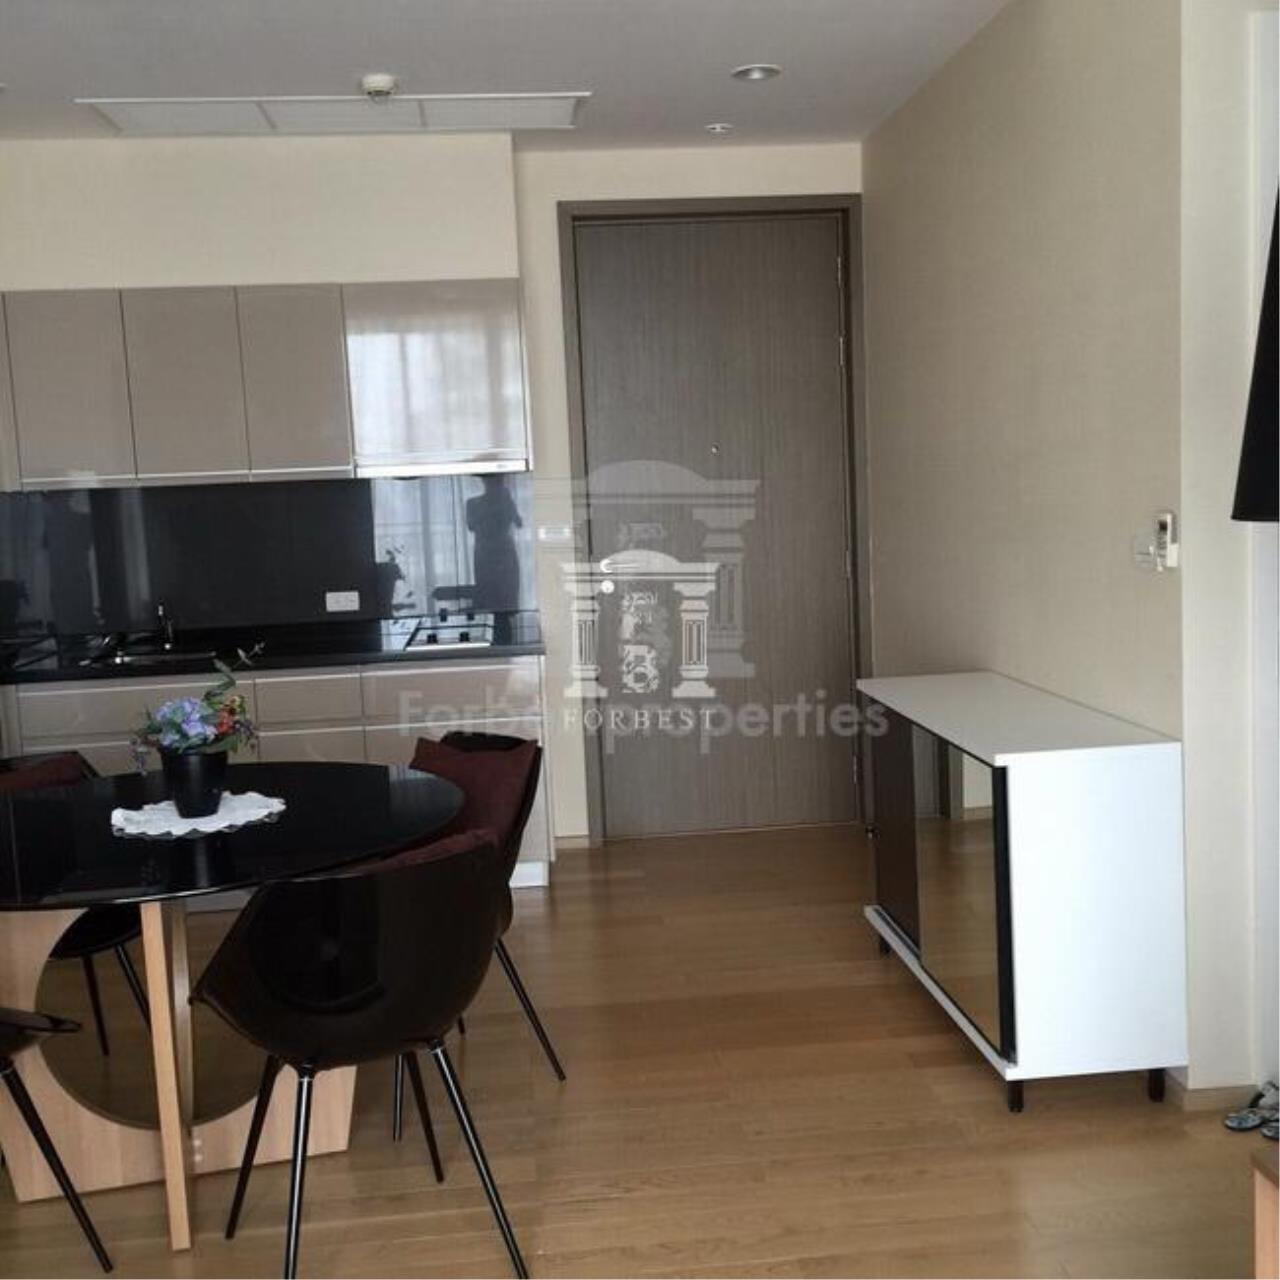 Forbest Properties Agency's 36136 - Condo for sale, 39 by Sansiri, area 56.31 sq.m. 3